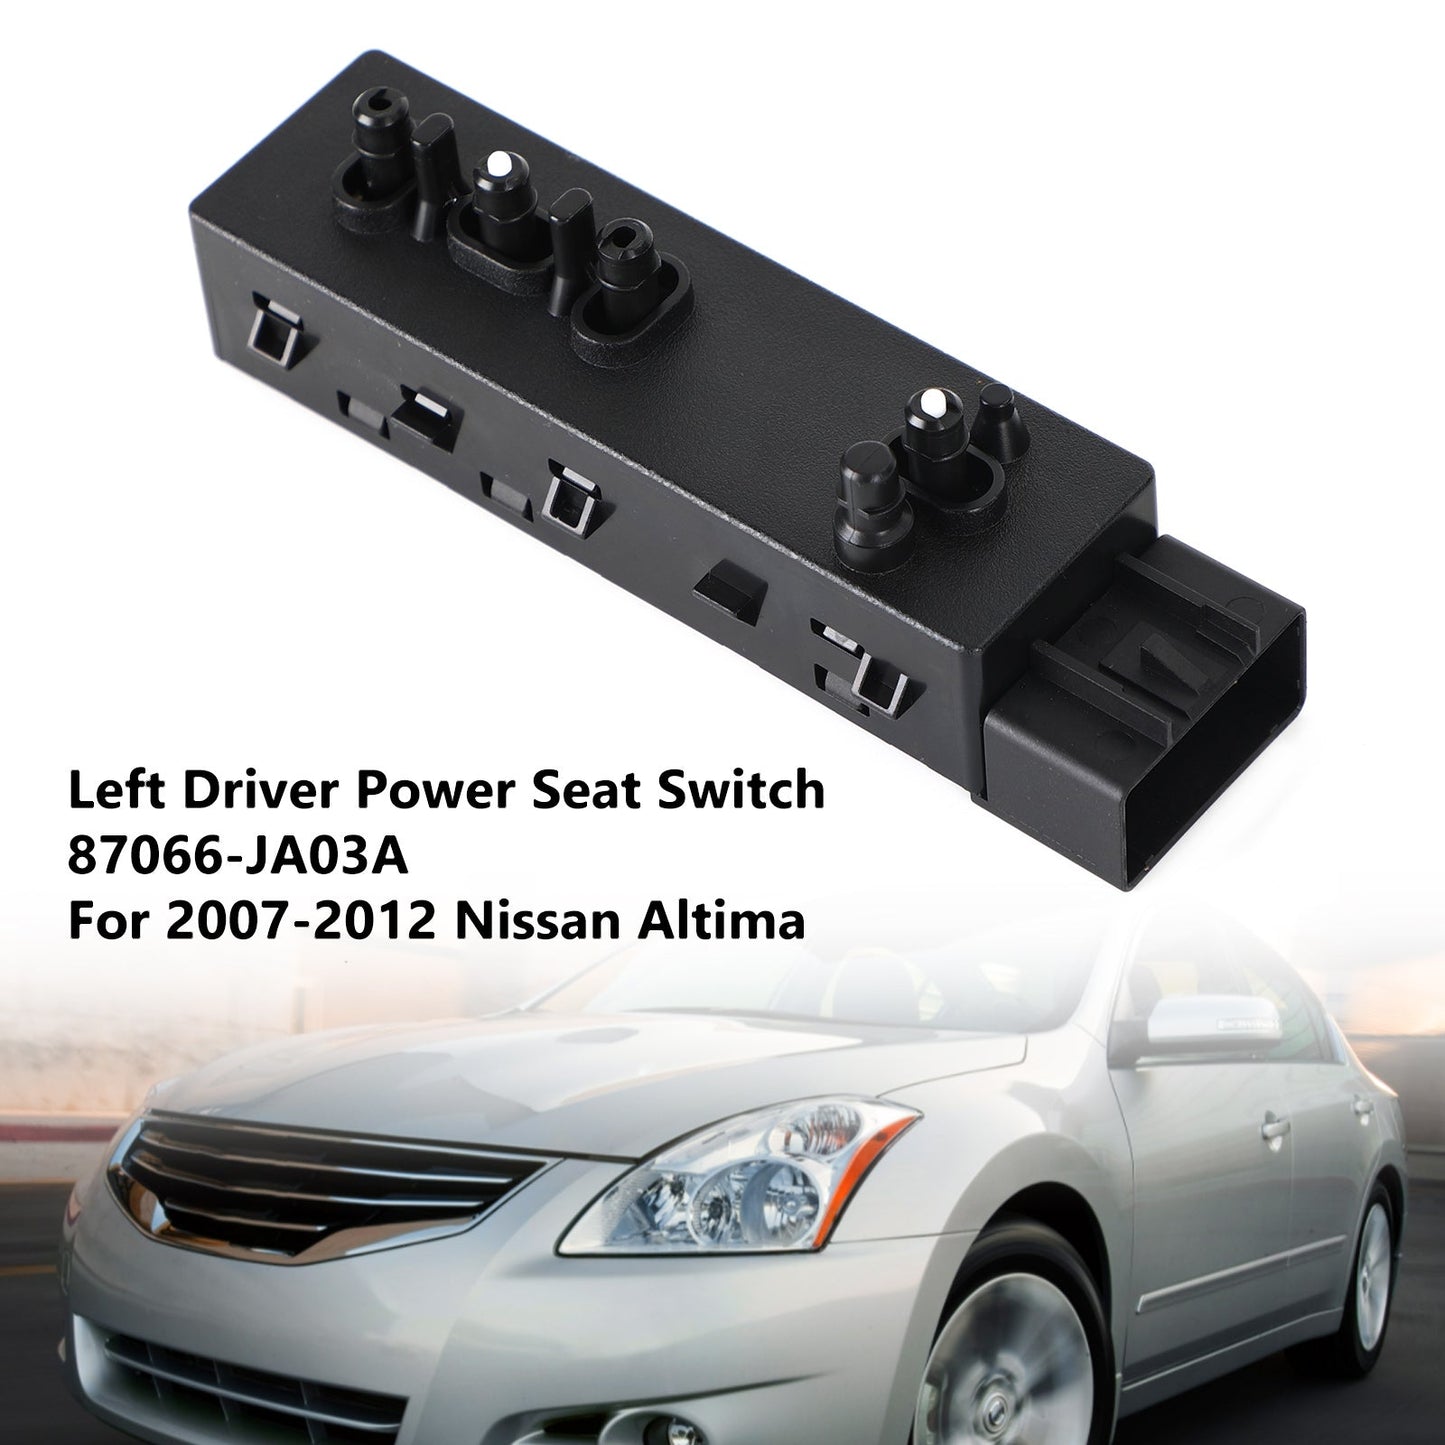 Left Driver Power Seat Switch 87066-JA03A For Nissan Altima 2007-2012